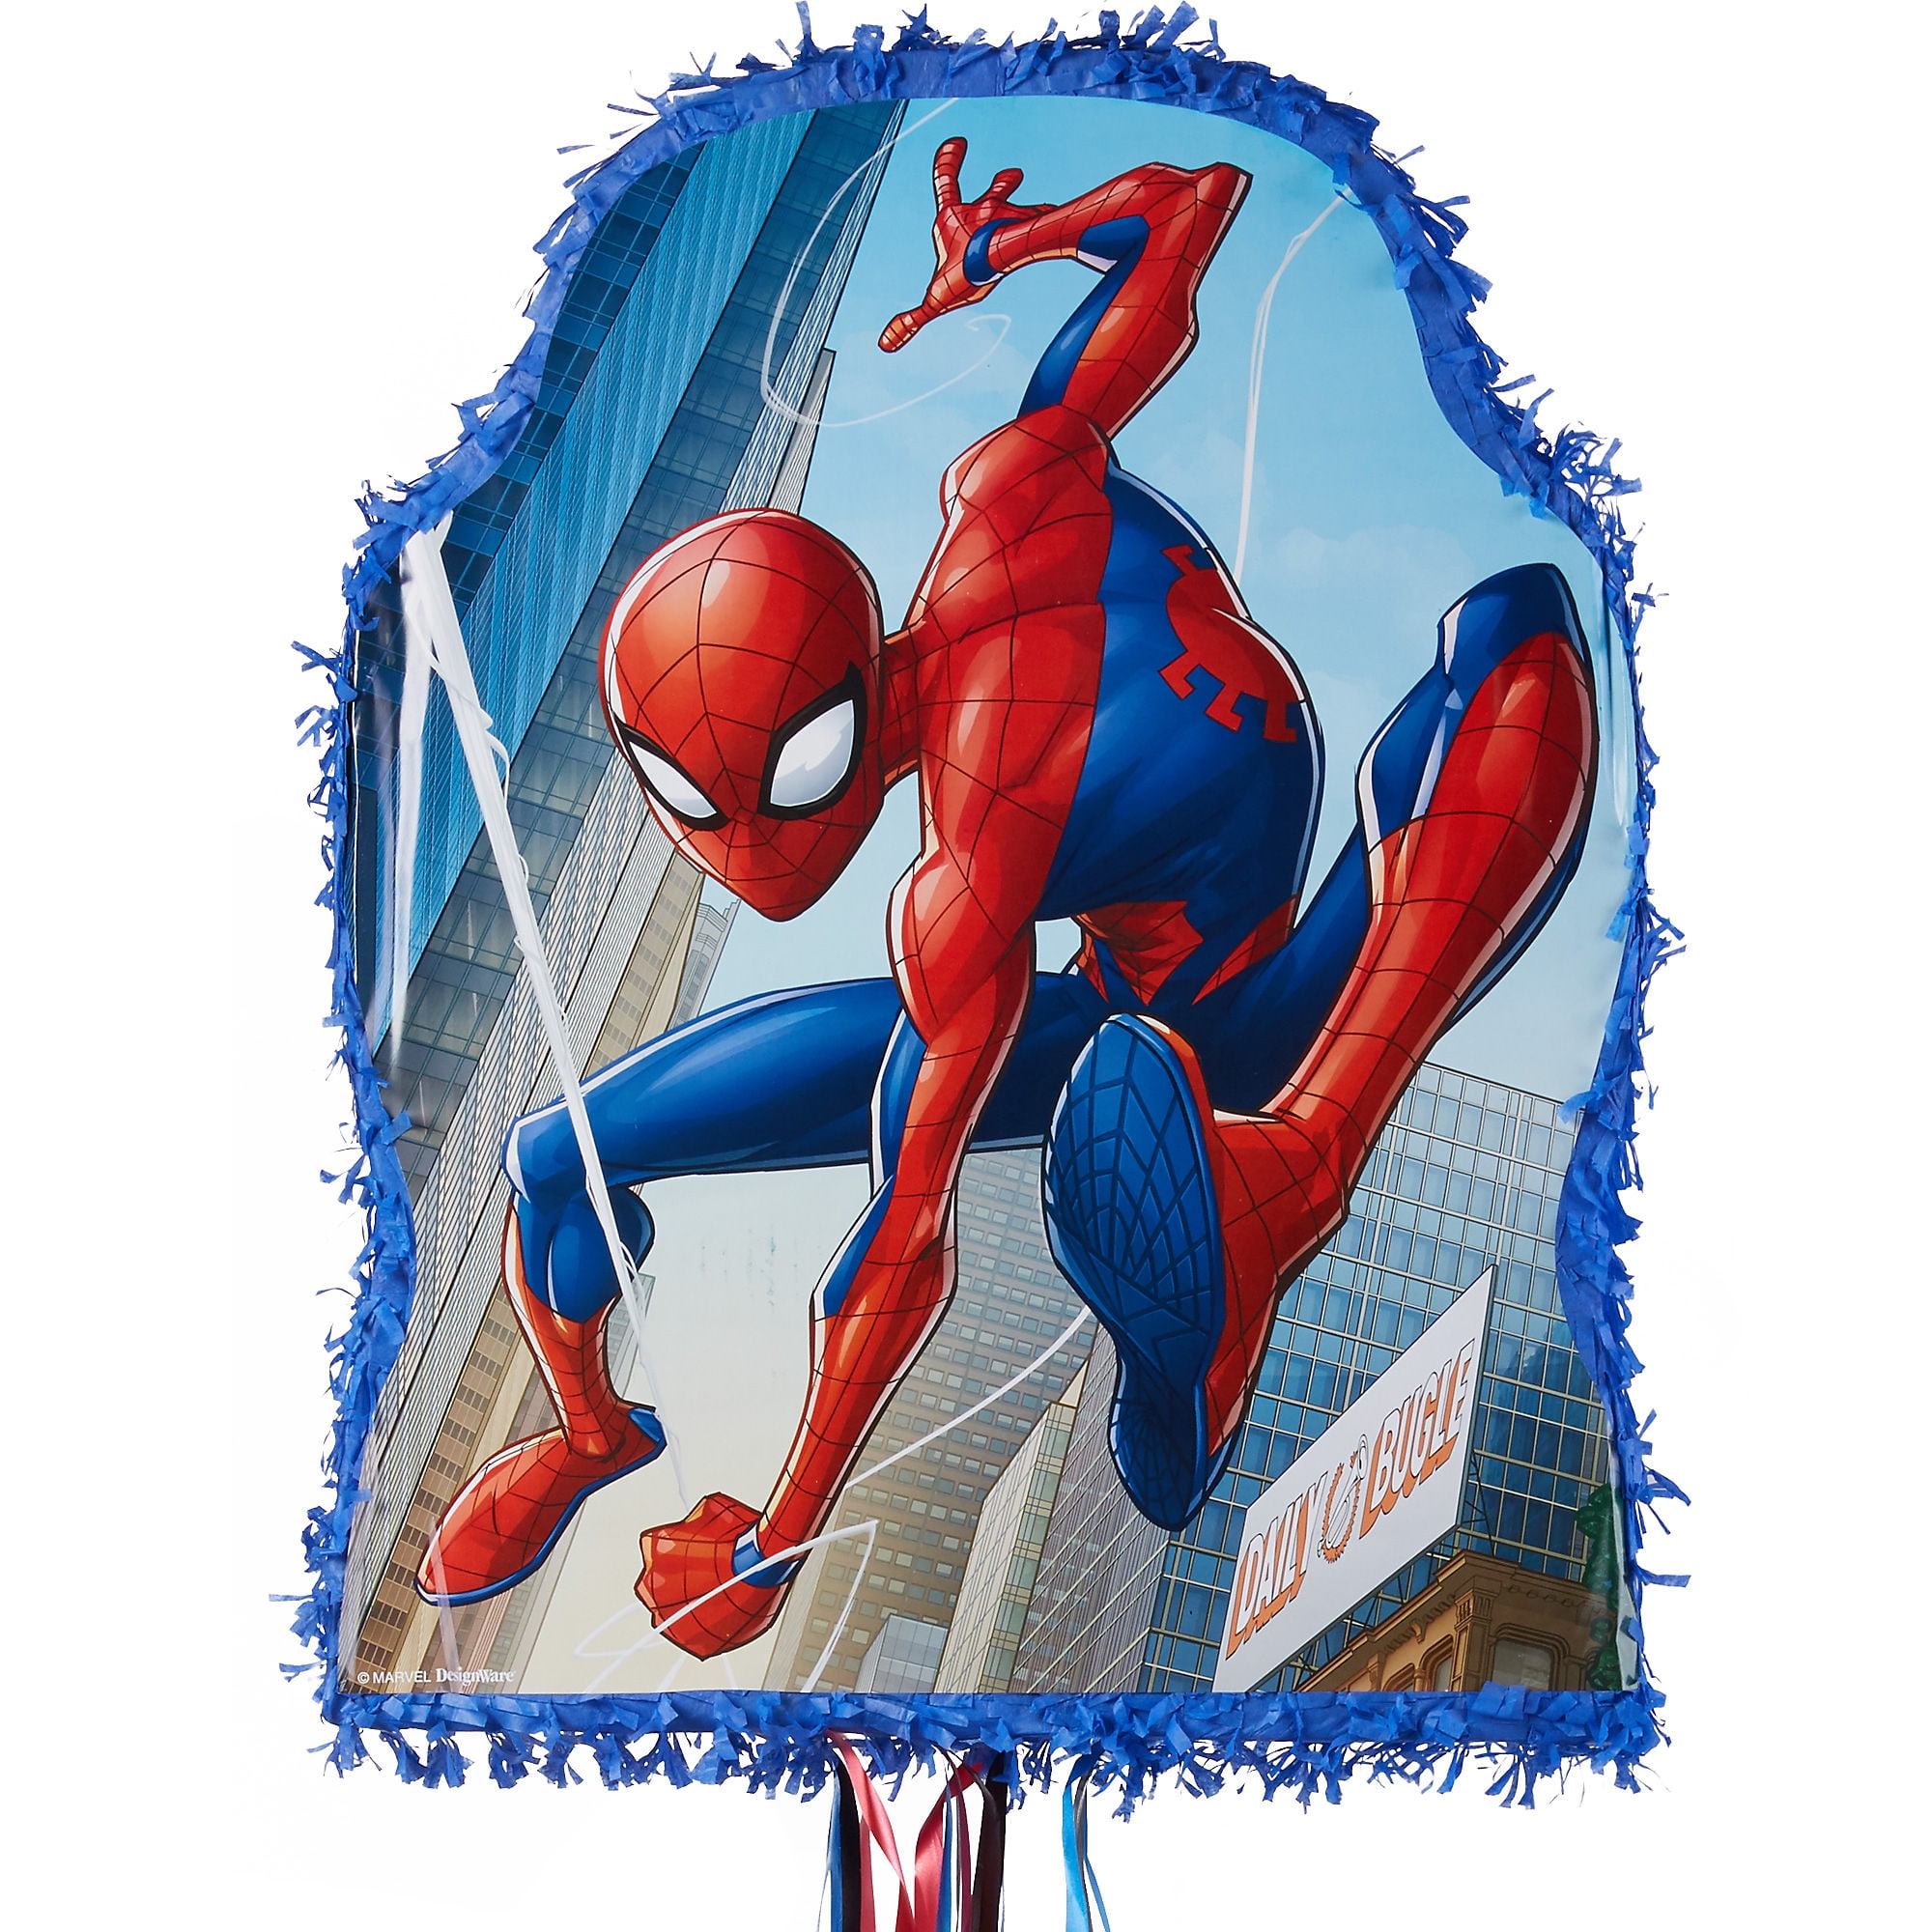  Spidey pinata, superhero movie pinata,boys and girls favorite  spider themed pinata, fillable gifts and candy. Can be used at birthday  parties and spider themed parties as well as Halloween, Christmas 